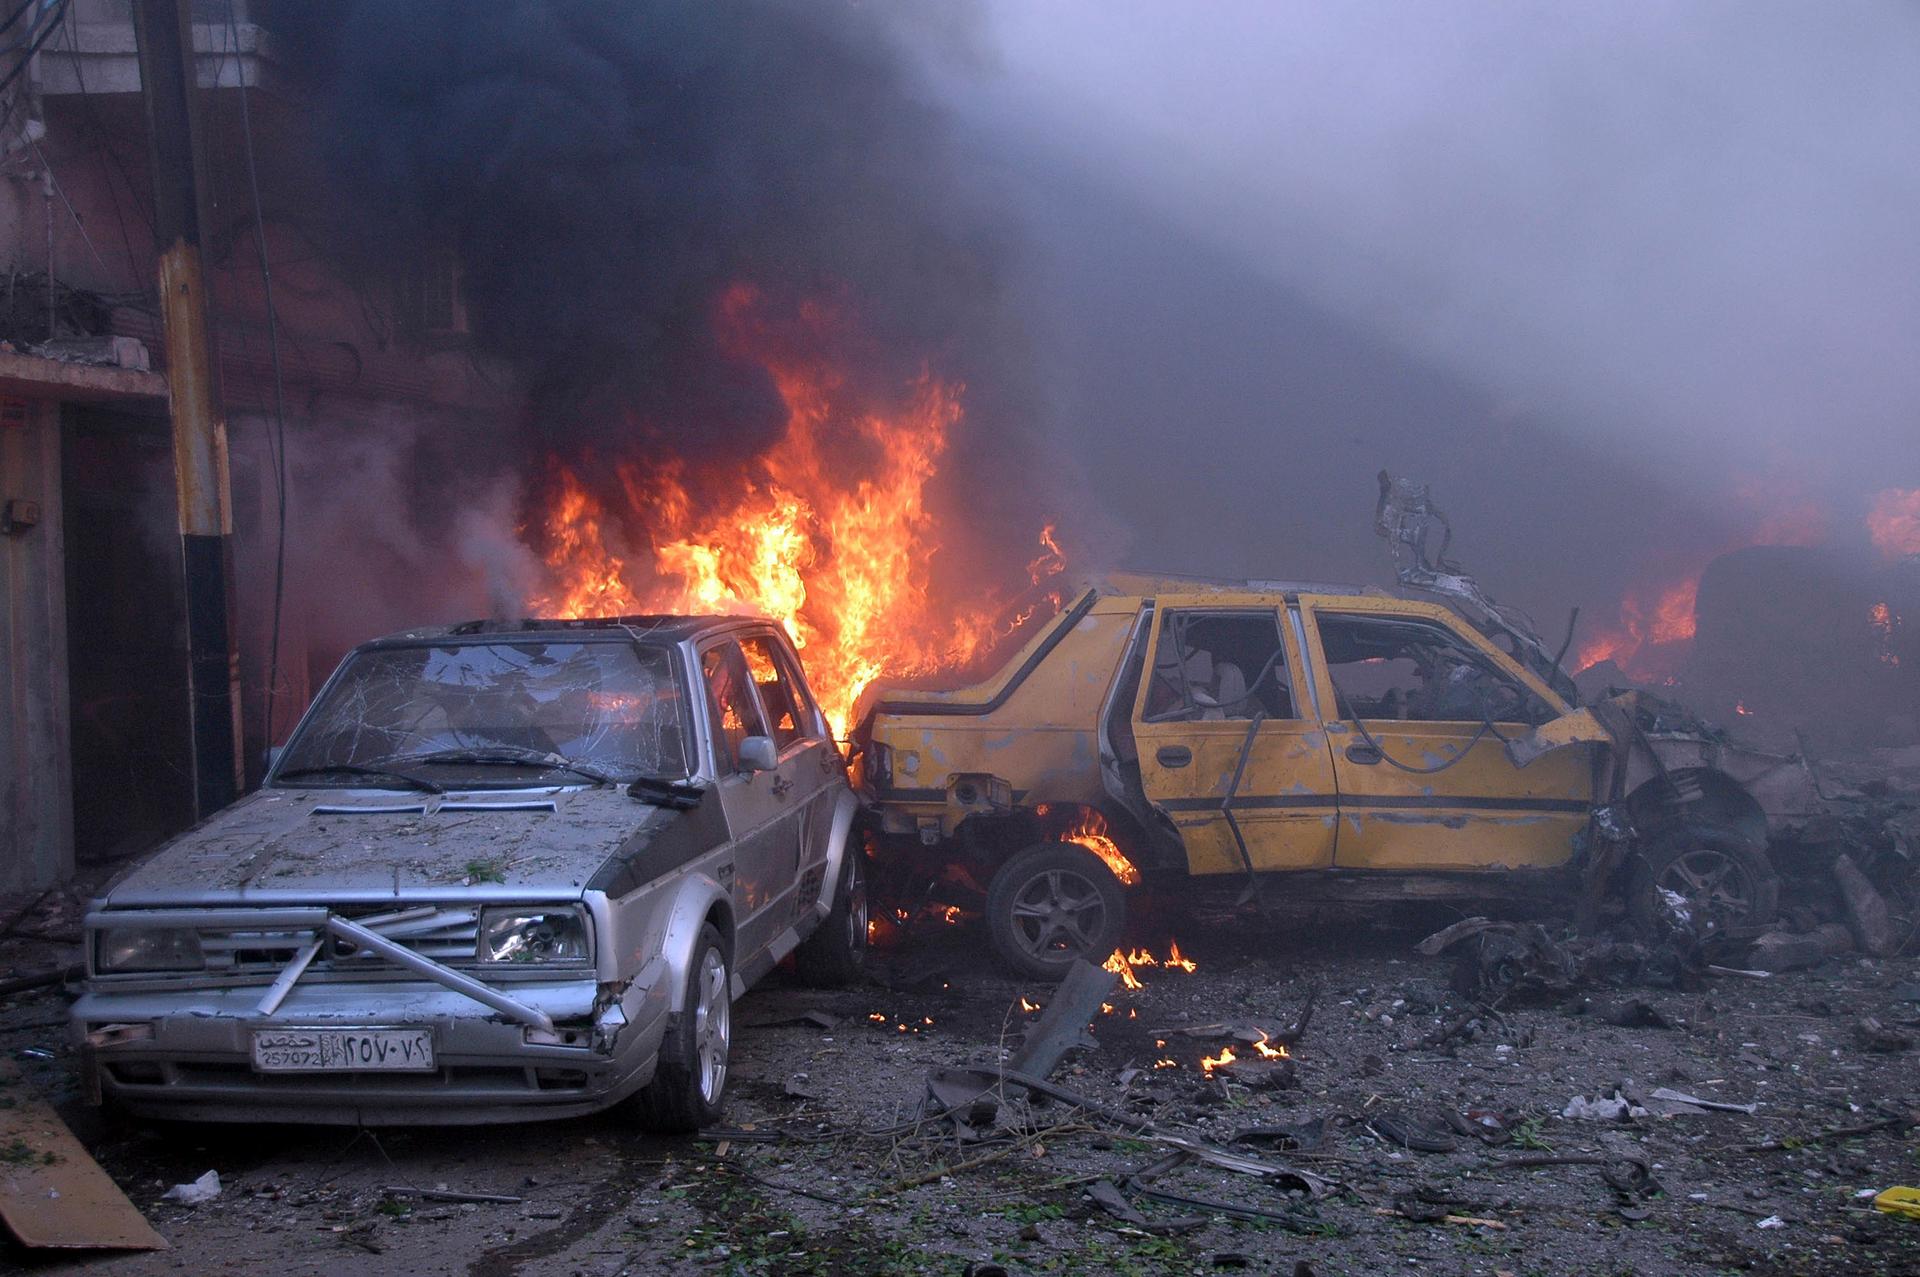 Vehicles burn after two car bombs exploded in the Karm al-Louz neighbourhood in Homs.